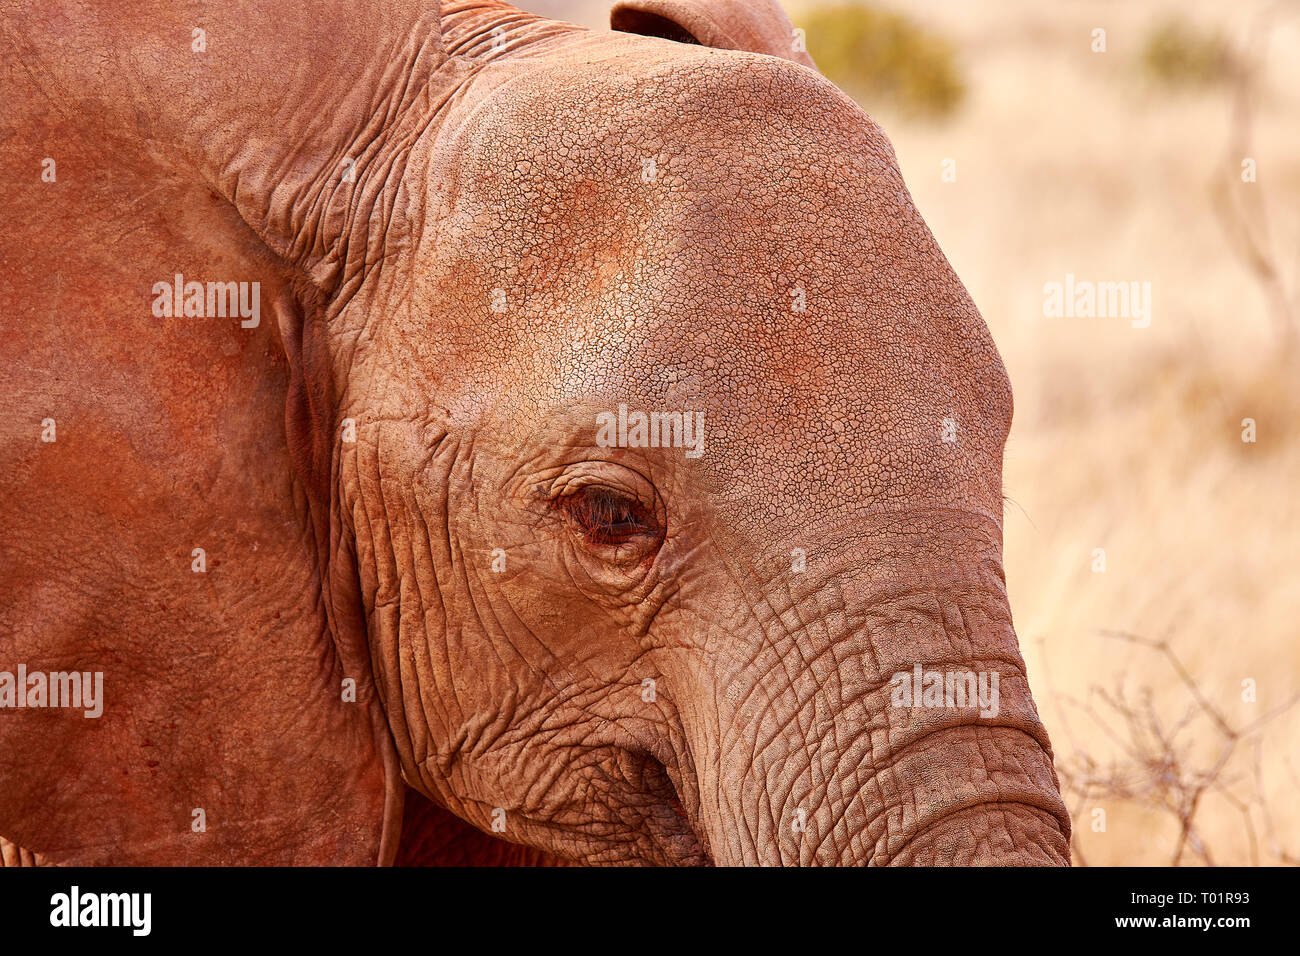 Detail of elephant head with eye and ear. African safari in Kenya. Stock Photo